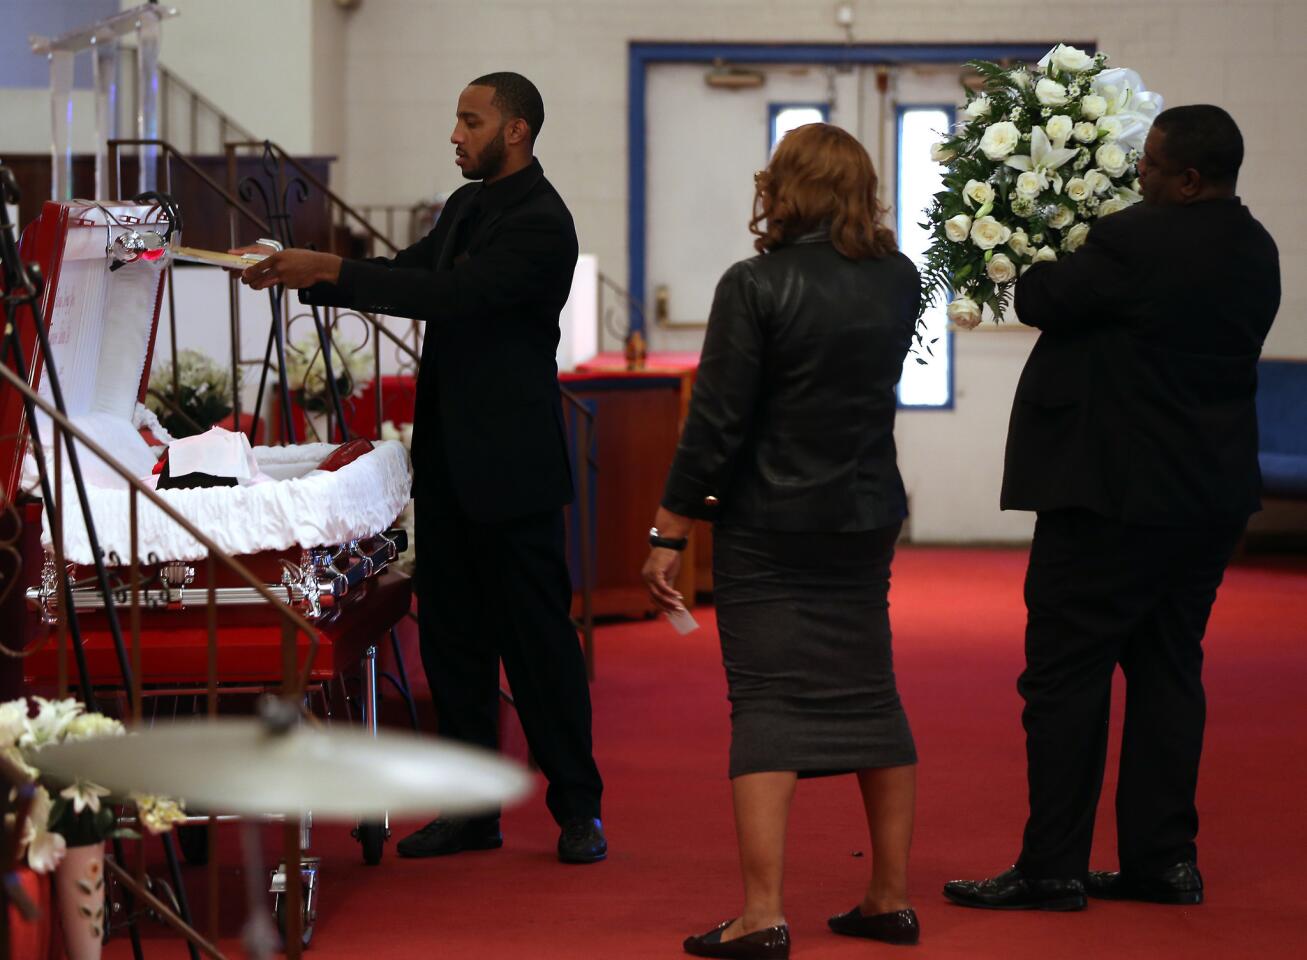 Final preparations are made to the casket for Tyshawn Lee's body Nov. 9, 2015, before a visitation at Haven of Rest Church in Chicago. Tyshawn, 9, was fatally shot Nov. 2 on Chicago's South Side.